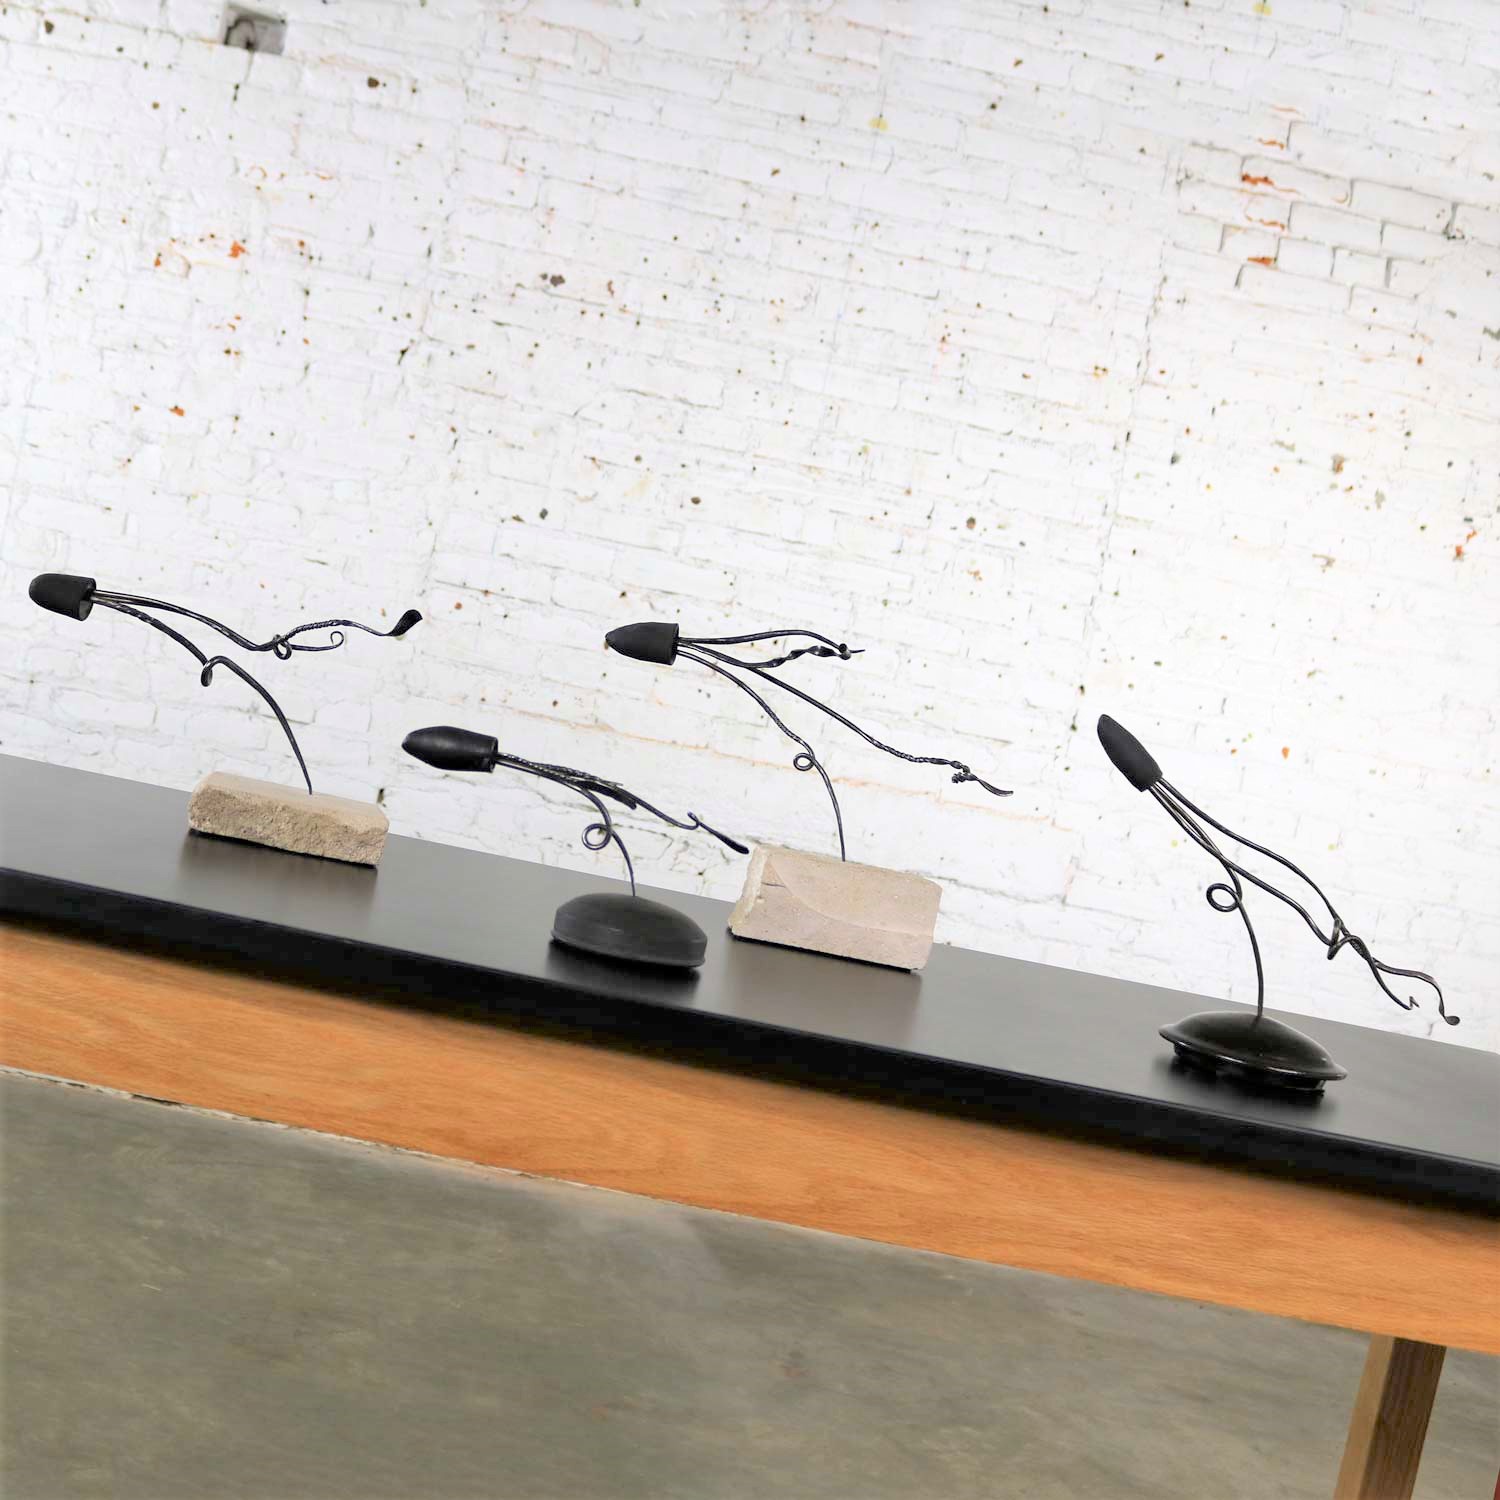 Loligo or Squid Metal Sculptures on Stone and Ceramic Bases by Larry Peters